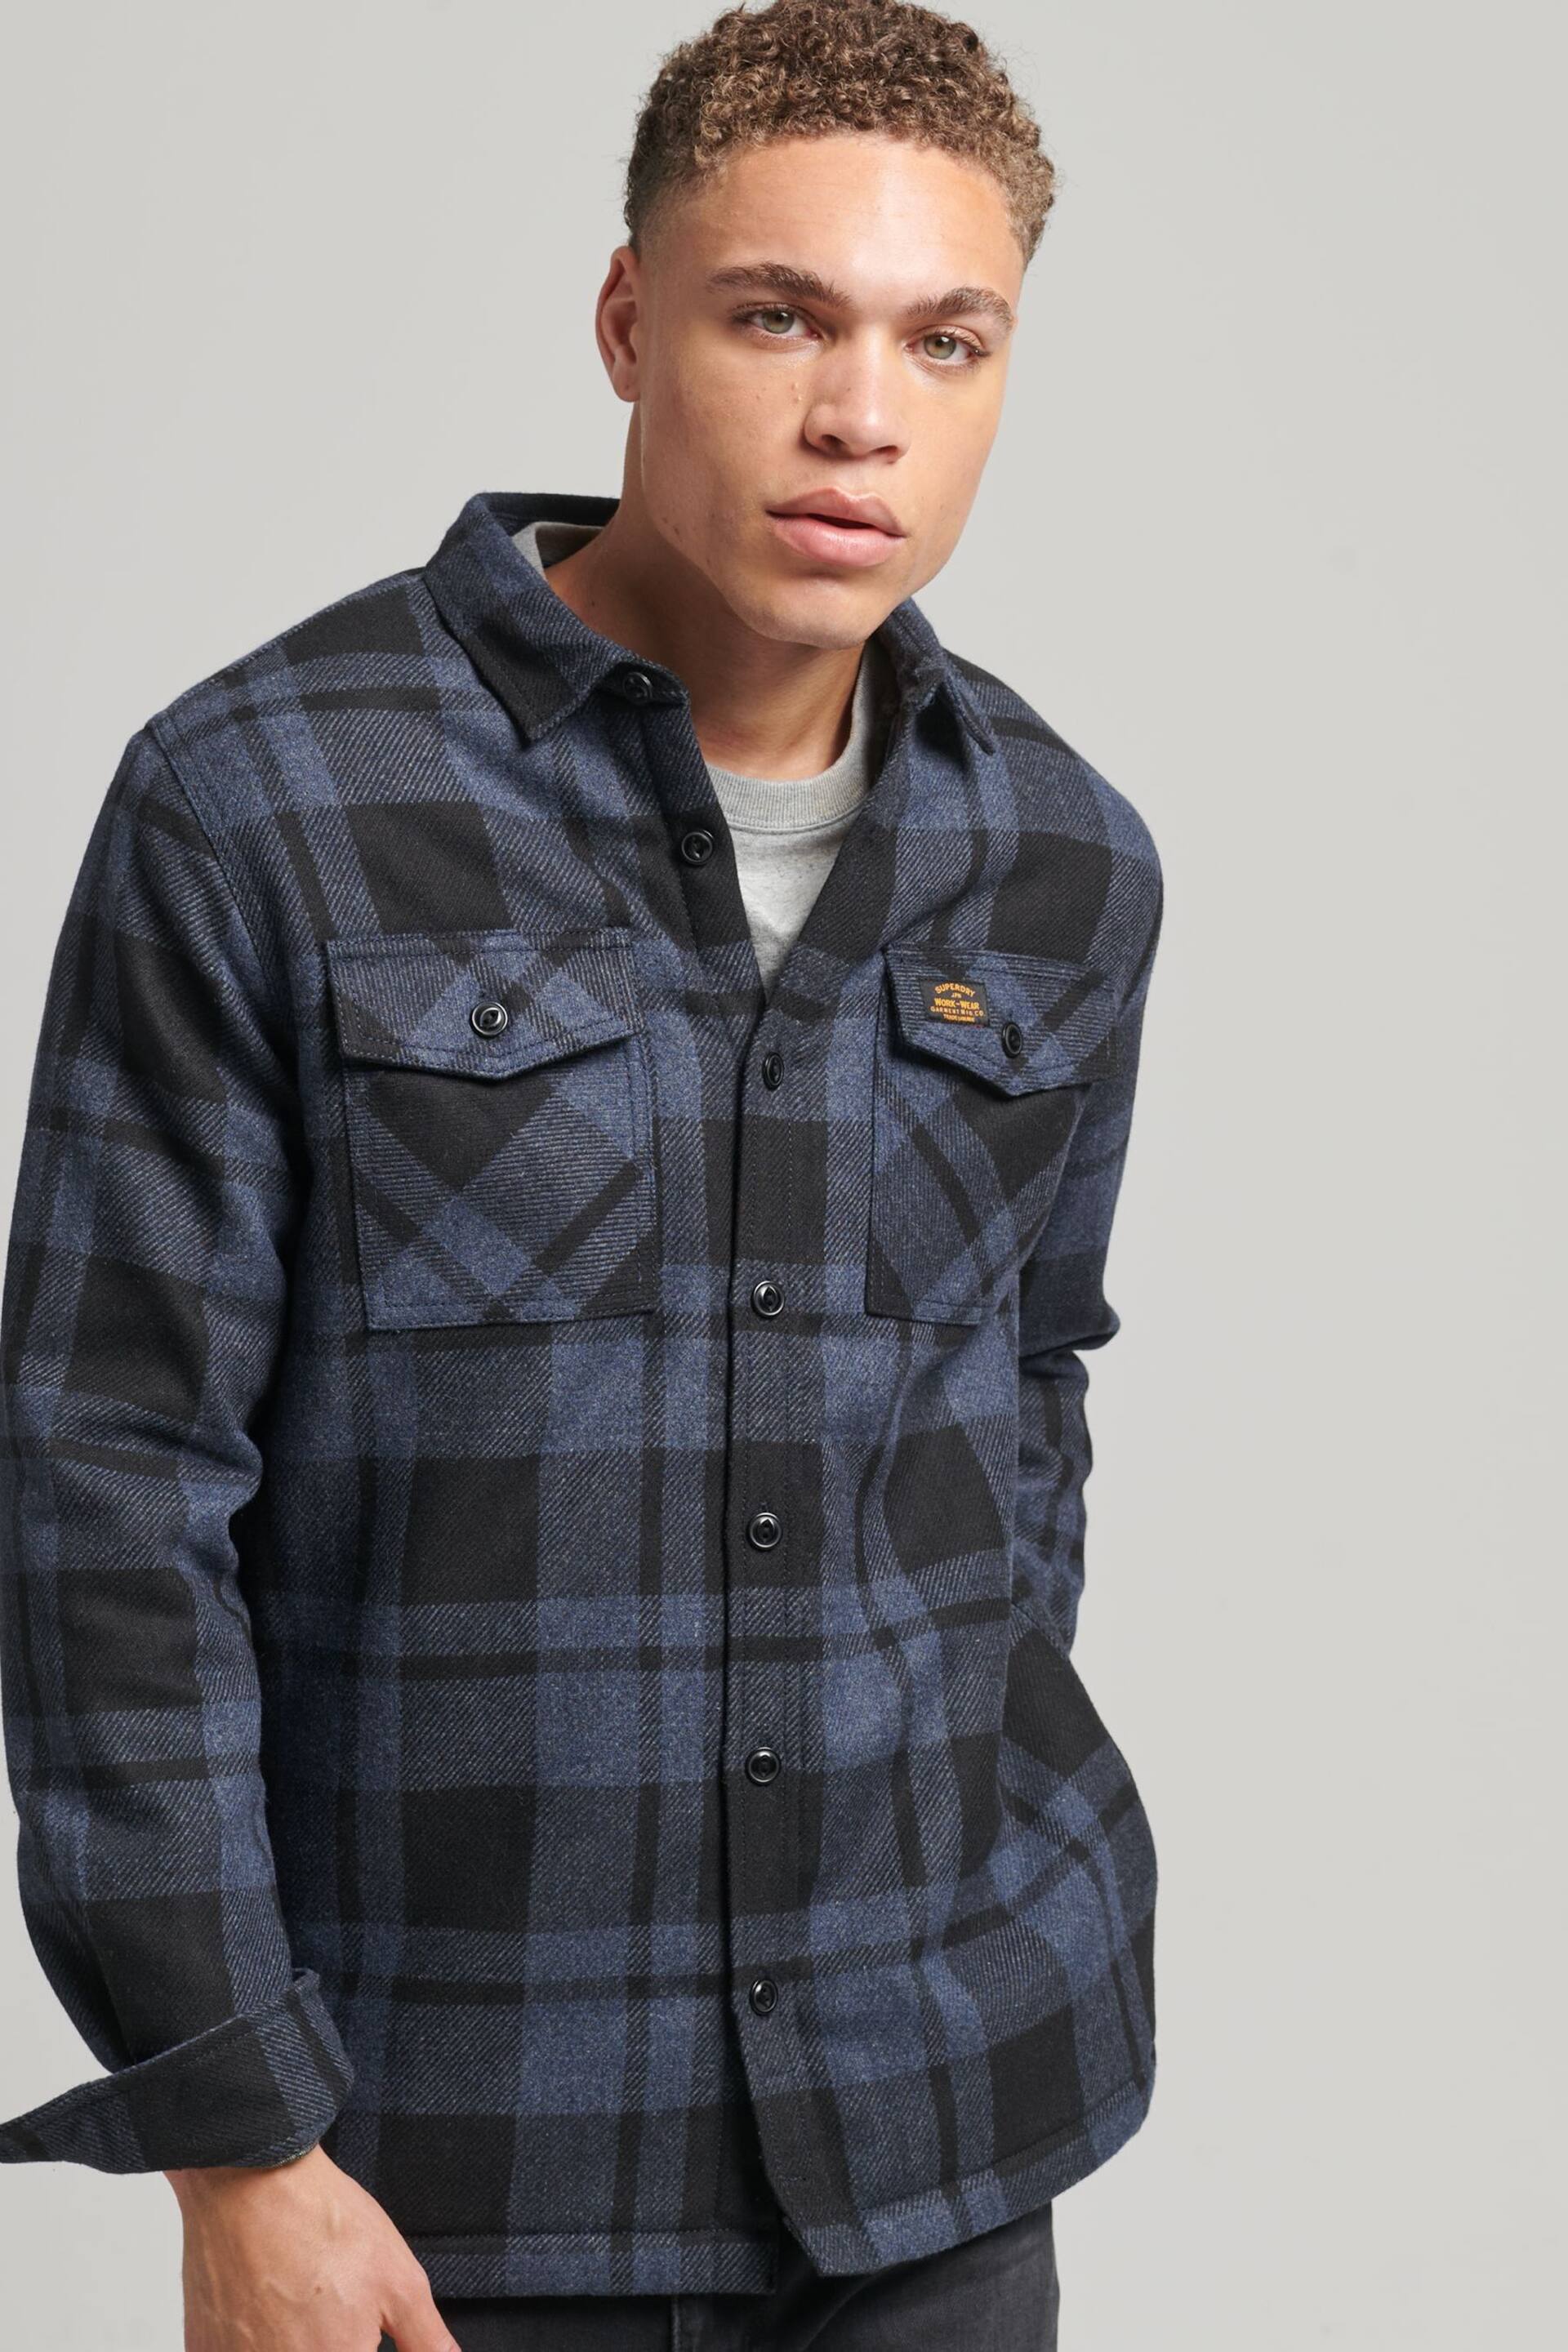 Superdry Roscoe Check Charcoal Vintage Miller Wool Shirt - Image 1 of 6